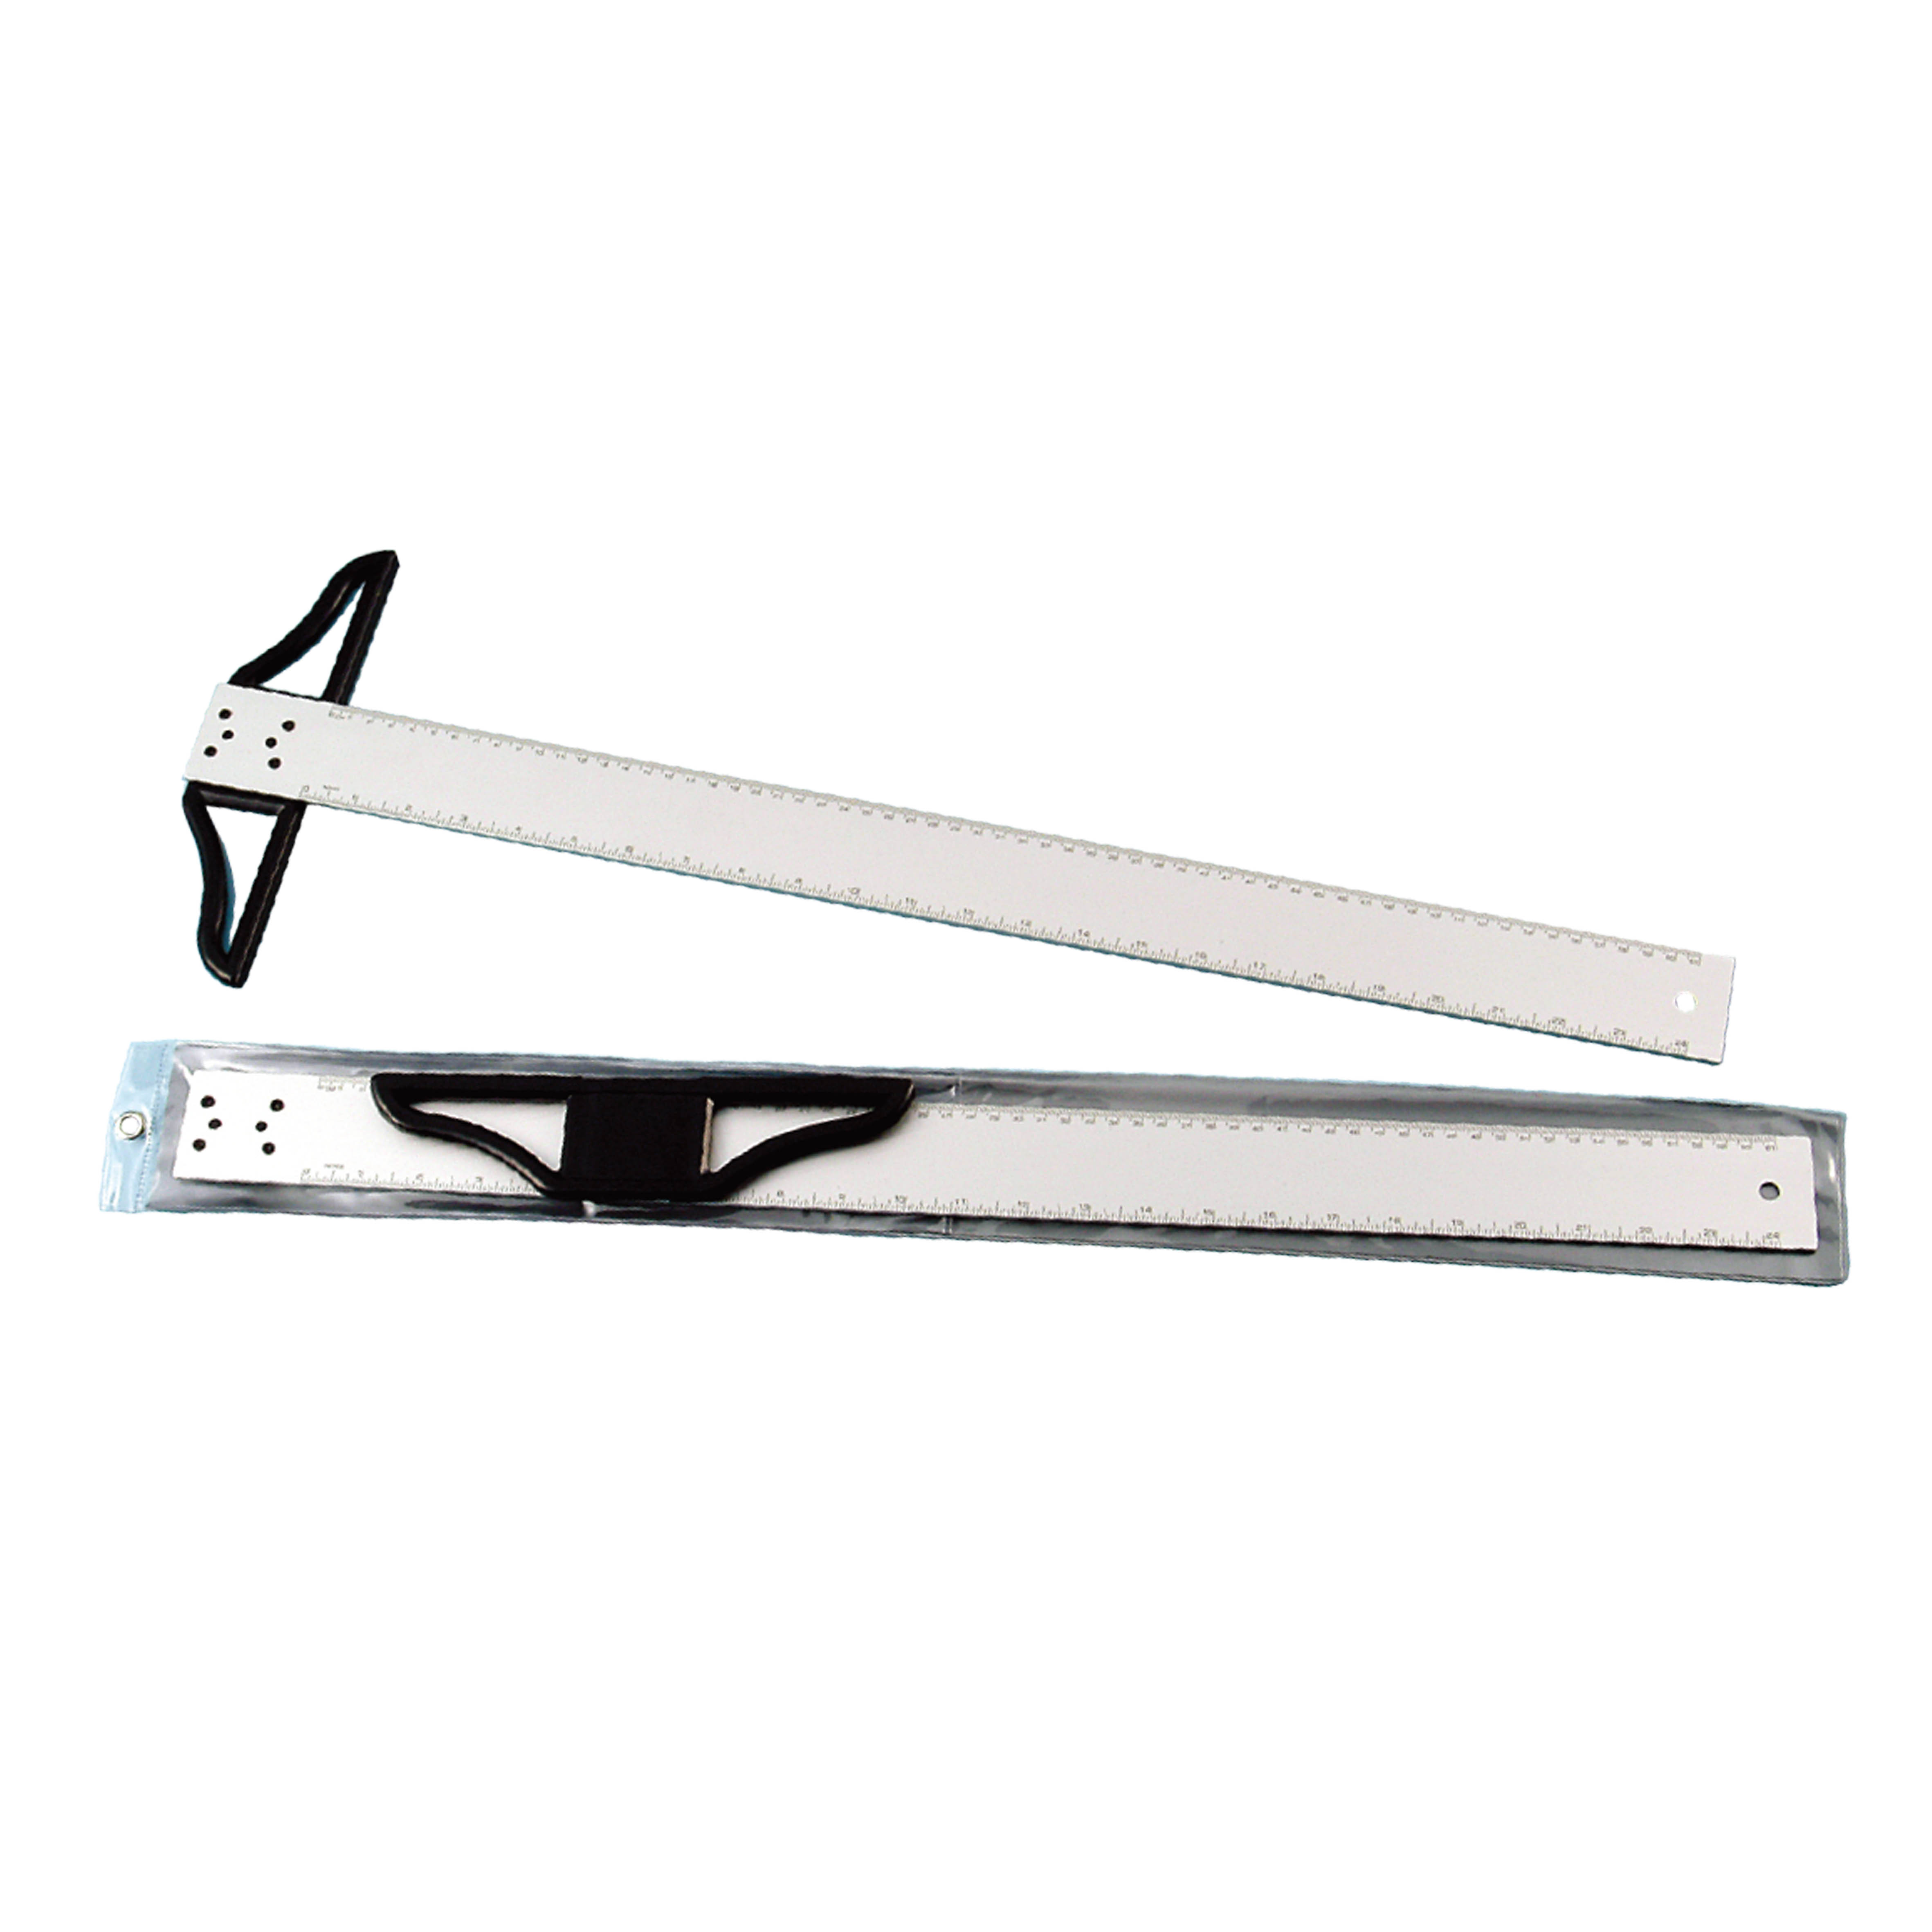 STAINLESS STEEL SQUARES / SQUARE RULERS